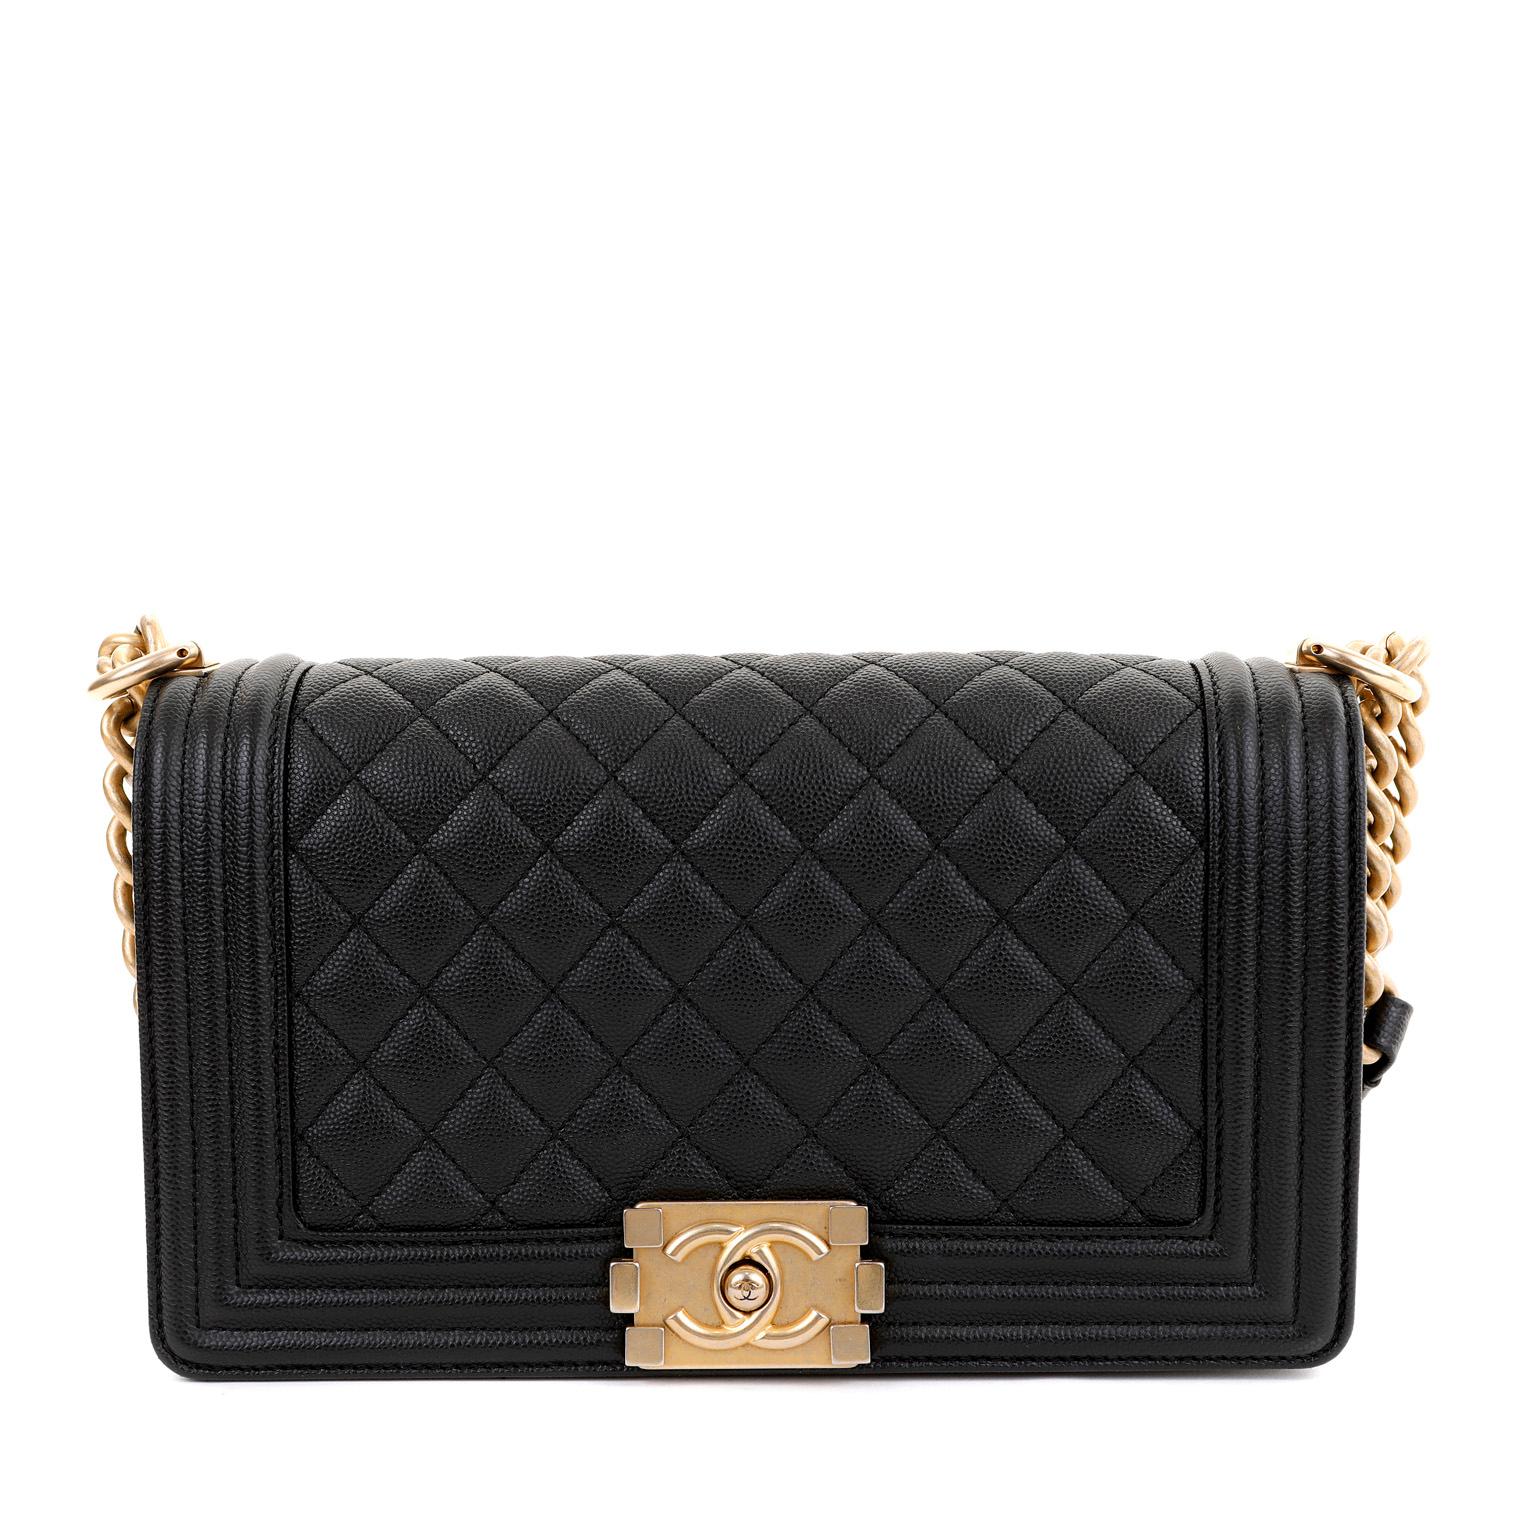 This authentic Chanel Black Caviar Medium Boy Bag is in pristine condition. The updated design is structured and edgy with a versatility that makes it extremely popular.  Black caviar leather is textured and durable. Further quilted in signature